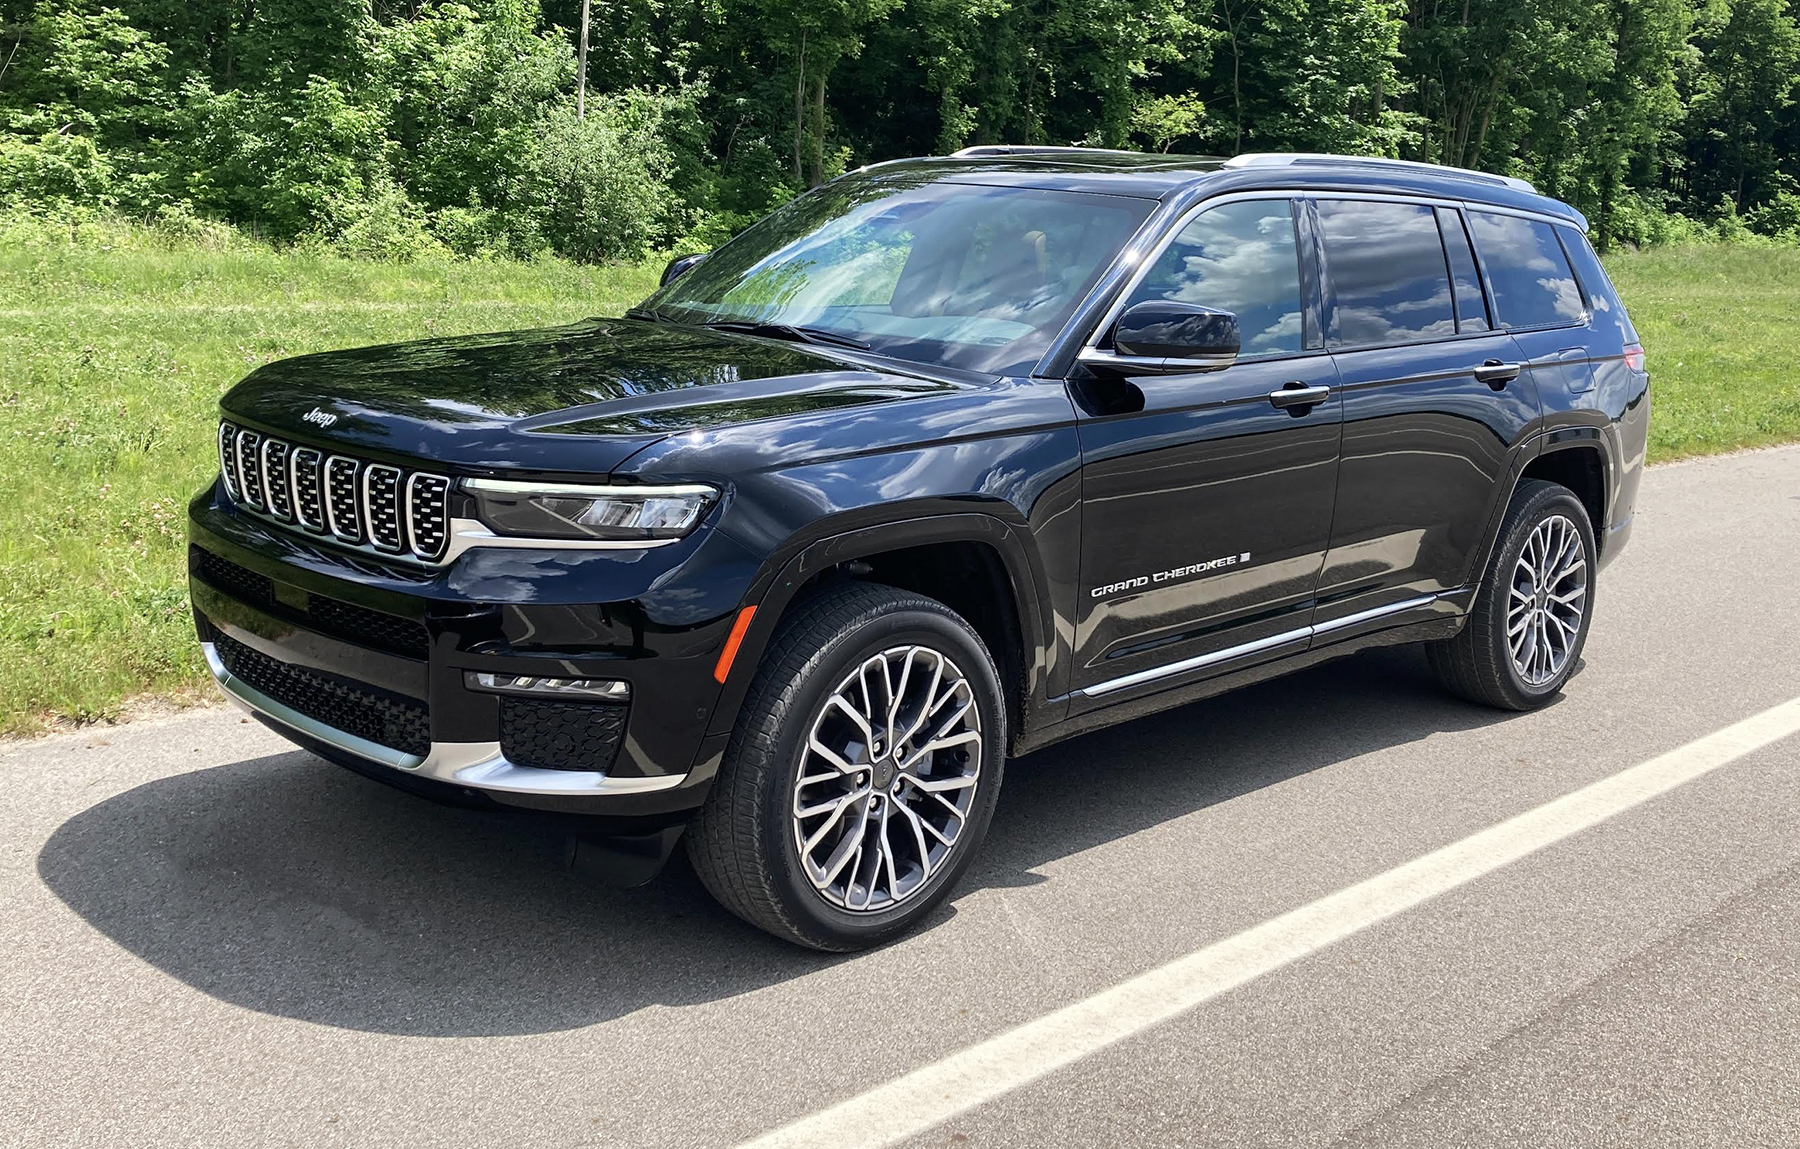 First Spin: 2021 Jeep Grand Cherokee L | The Daily Drive | Consumer Guide®  The Daily Drive | Consumer Guide®